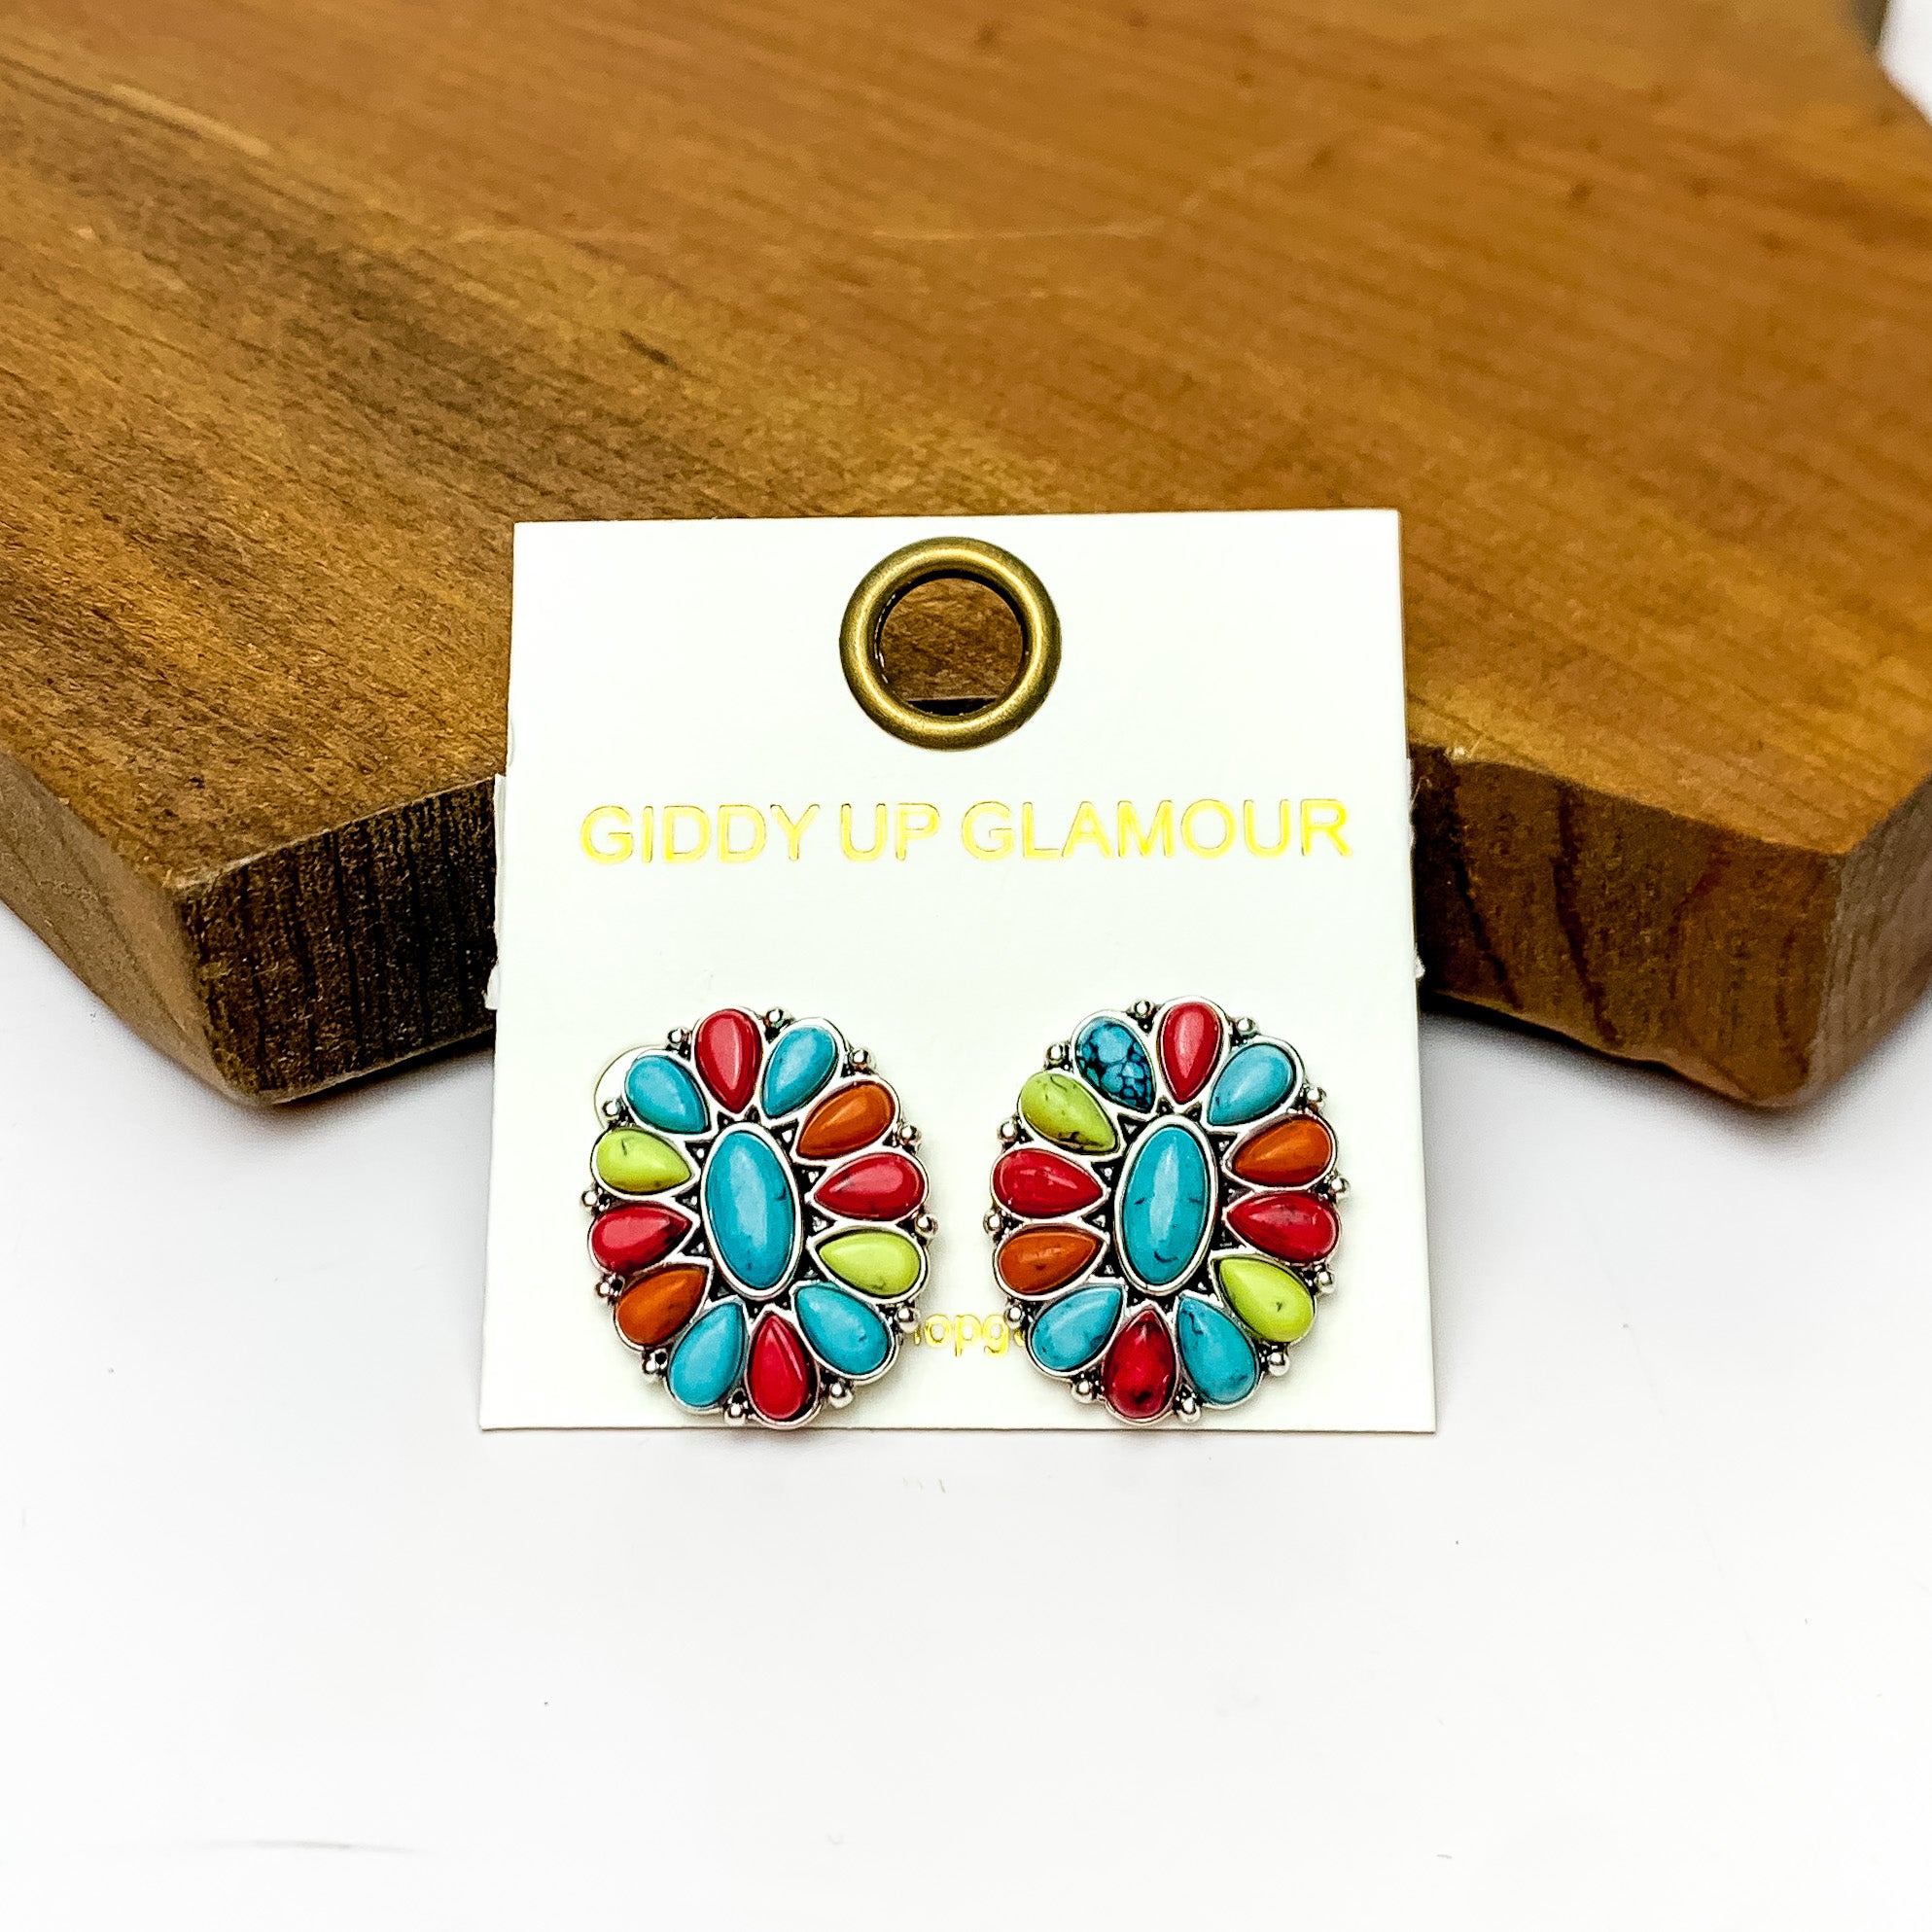 Silver Tone Concho Cluster Oval Earrings in Multicolored. Pictured on a white background with the earrings laying against a wood piece.